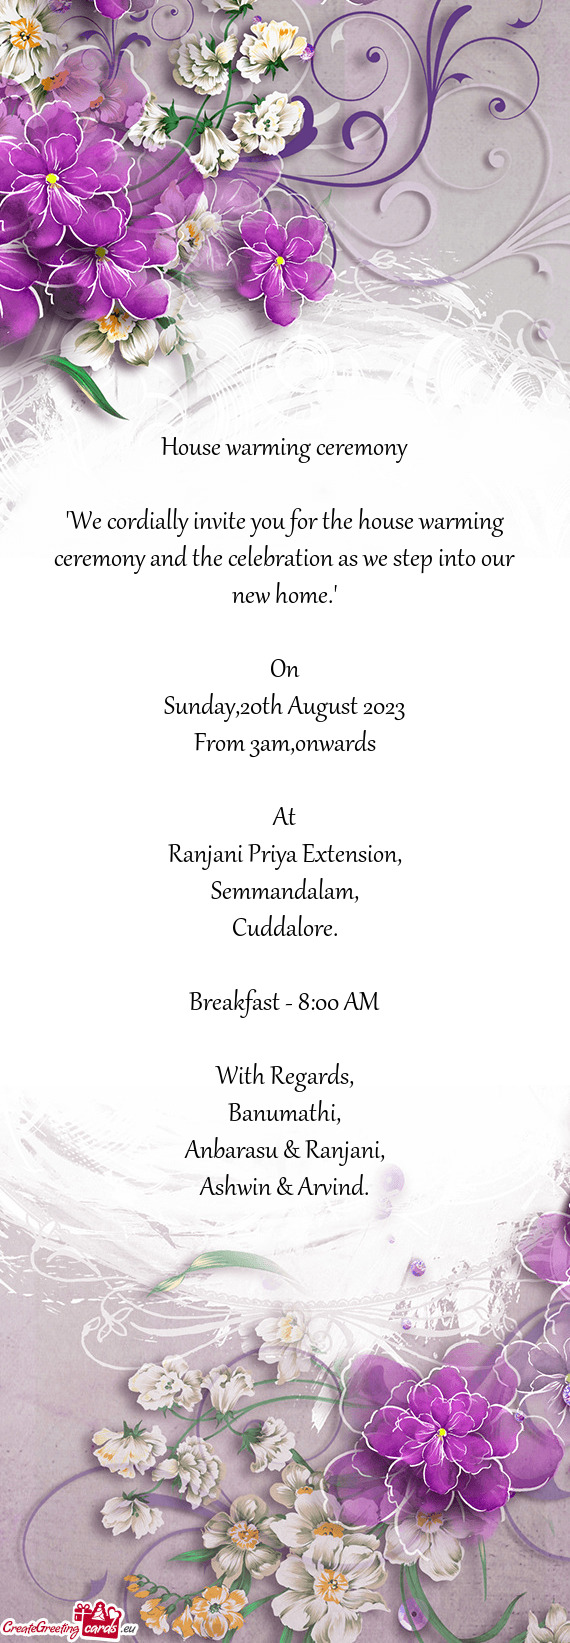 "We cordially invite you for the house warming ceremony and the celebration as we step into our new